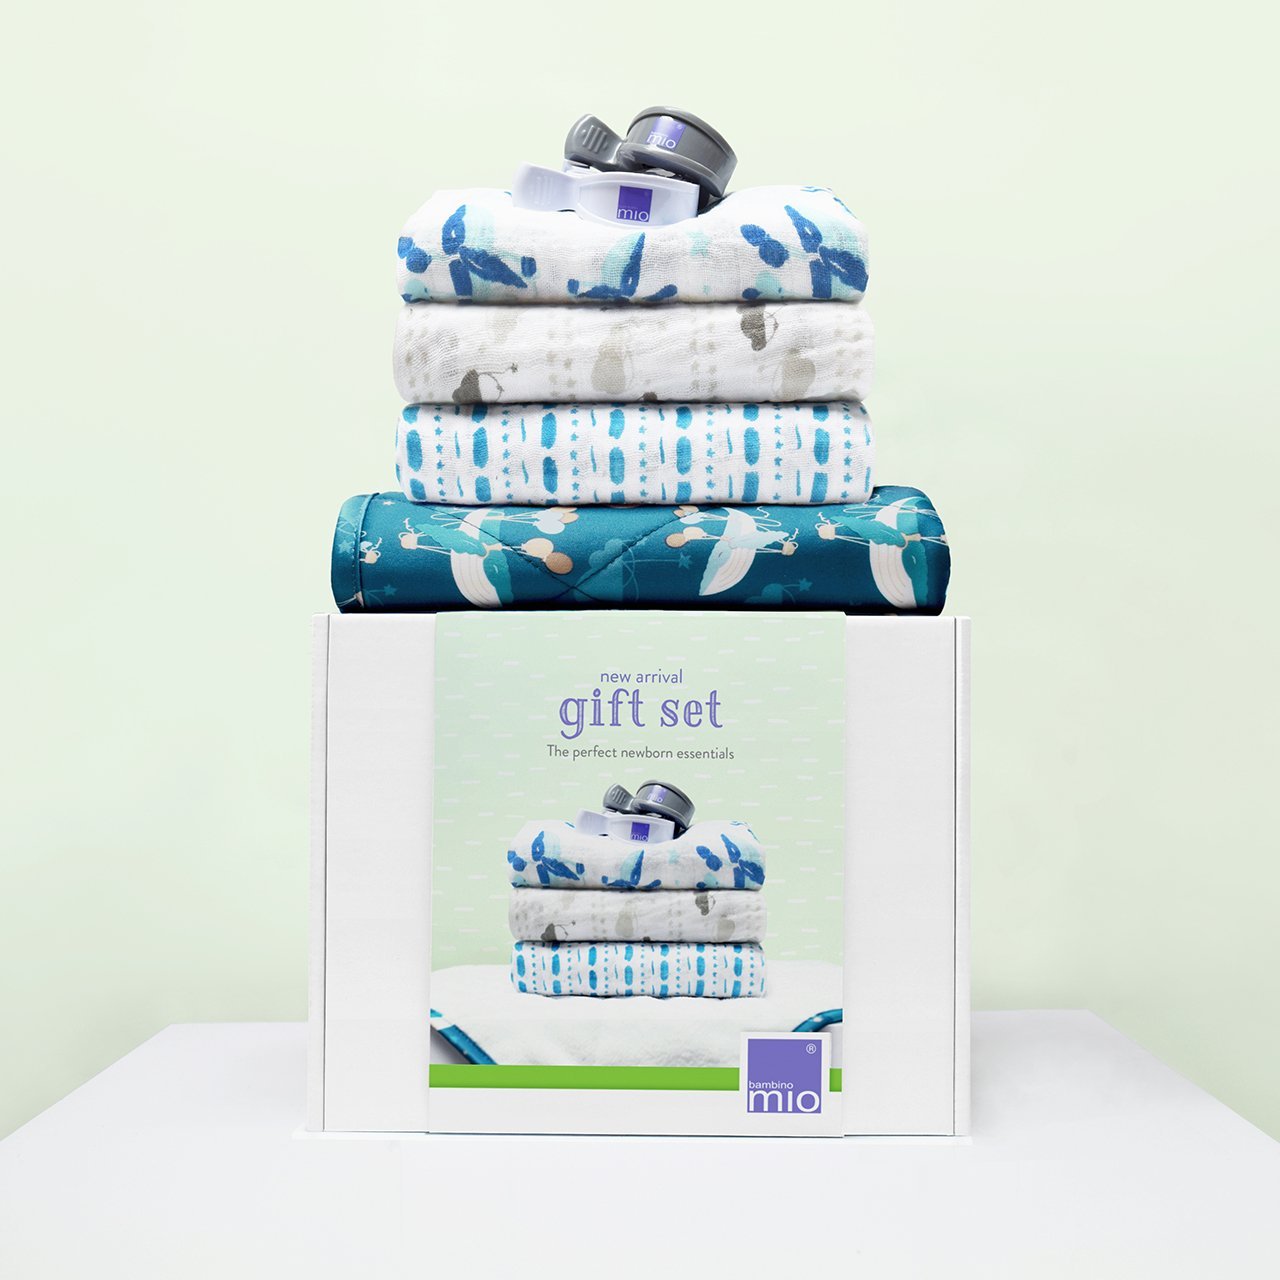 Bambino Mio| New Arrival Gift Set - Newborn Essentials | Earthlets.com |  | changing change mats